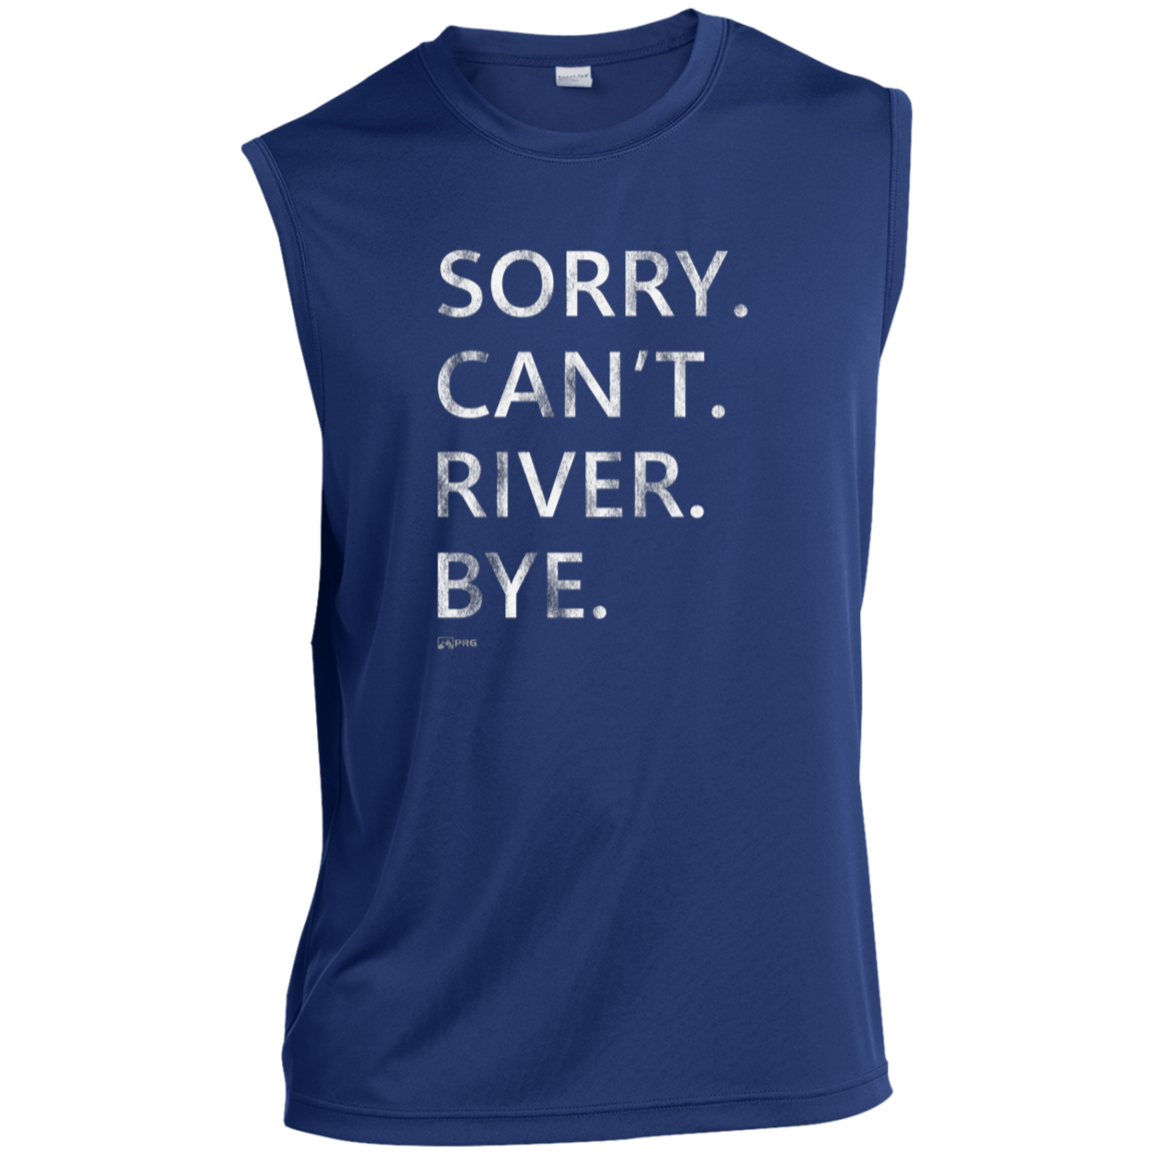 Sorry. Can't. River. Bye. - Sleeveless